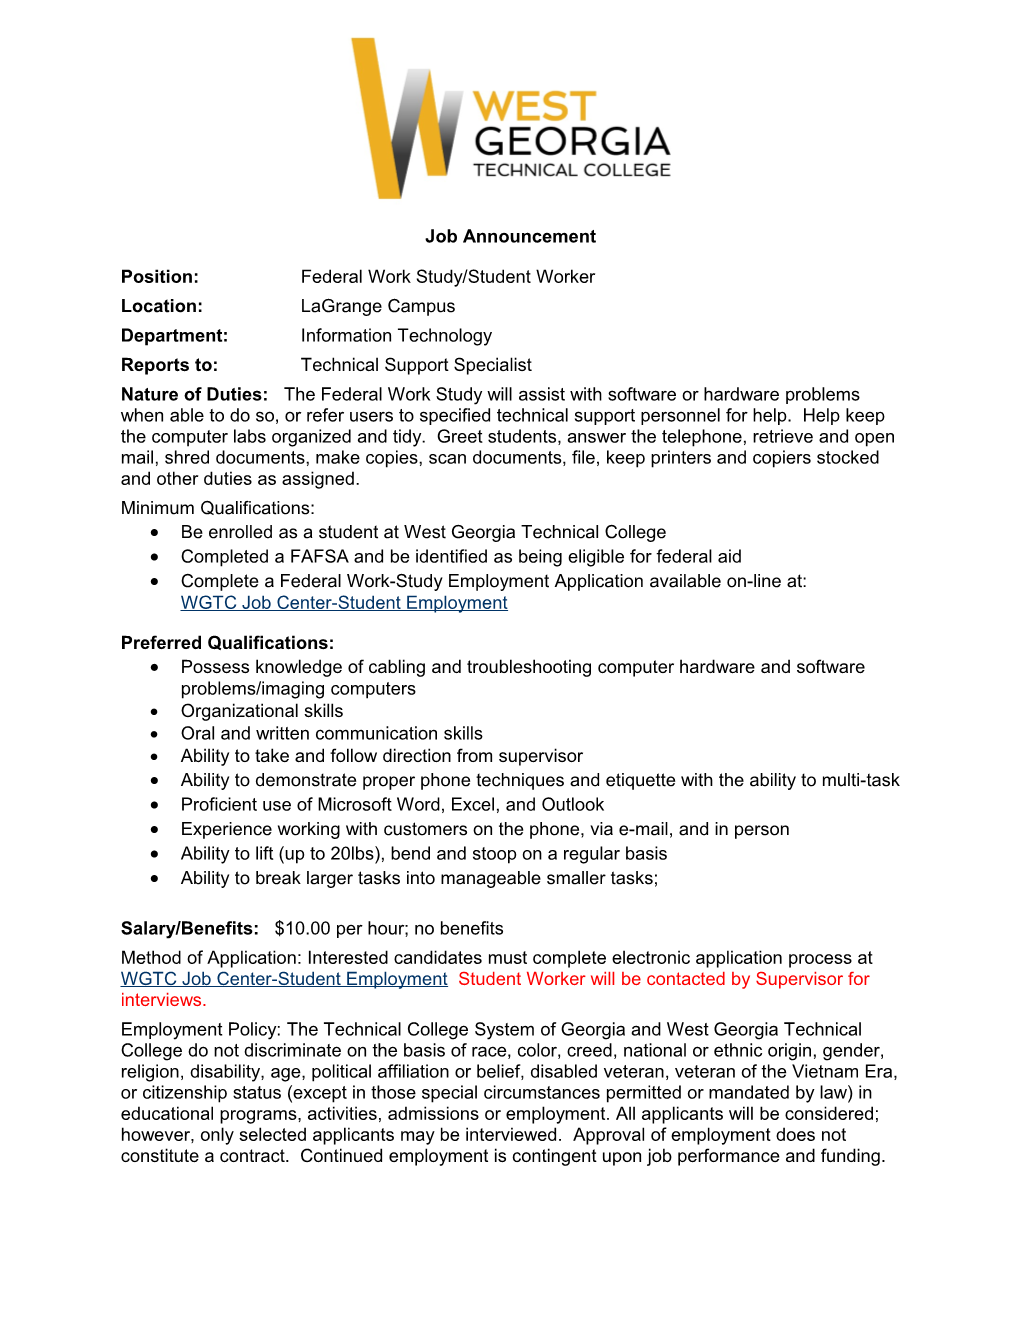 Position: Federal Work Study/Student Worker s1